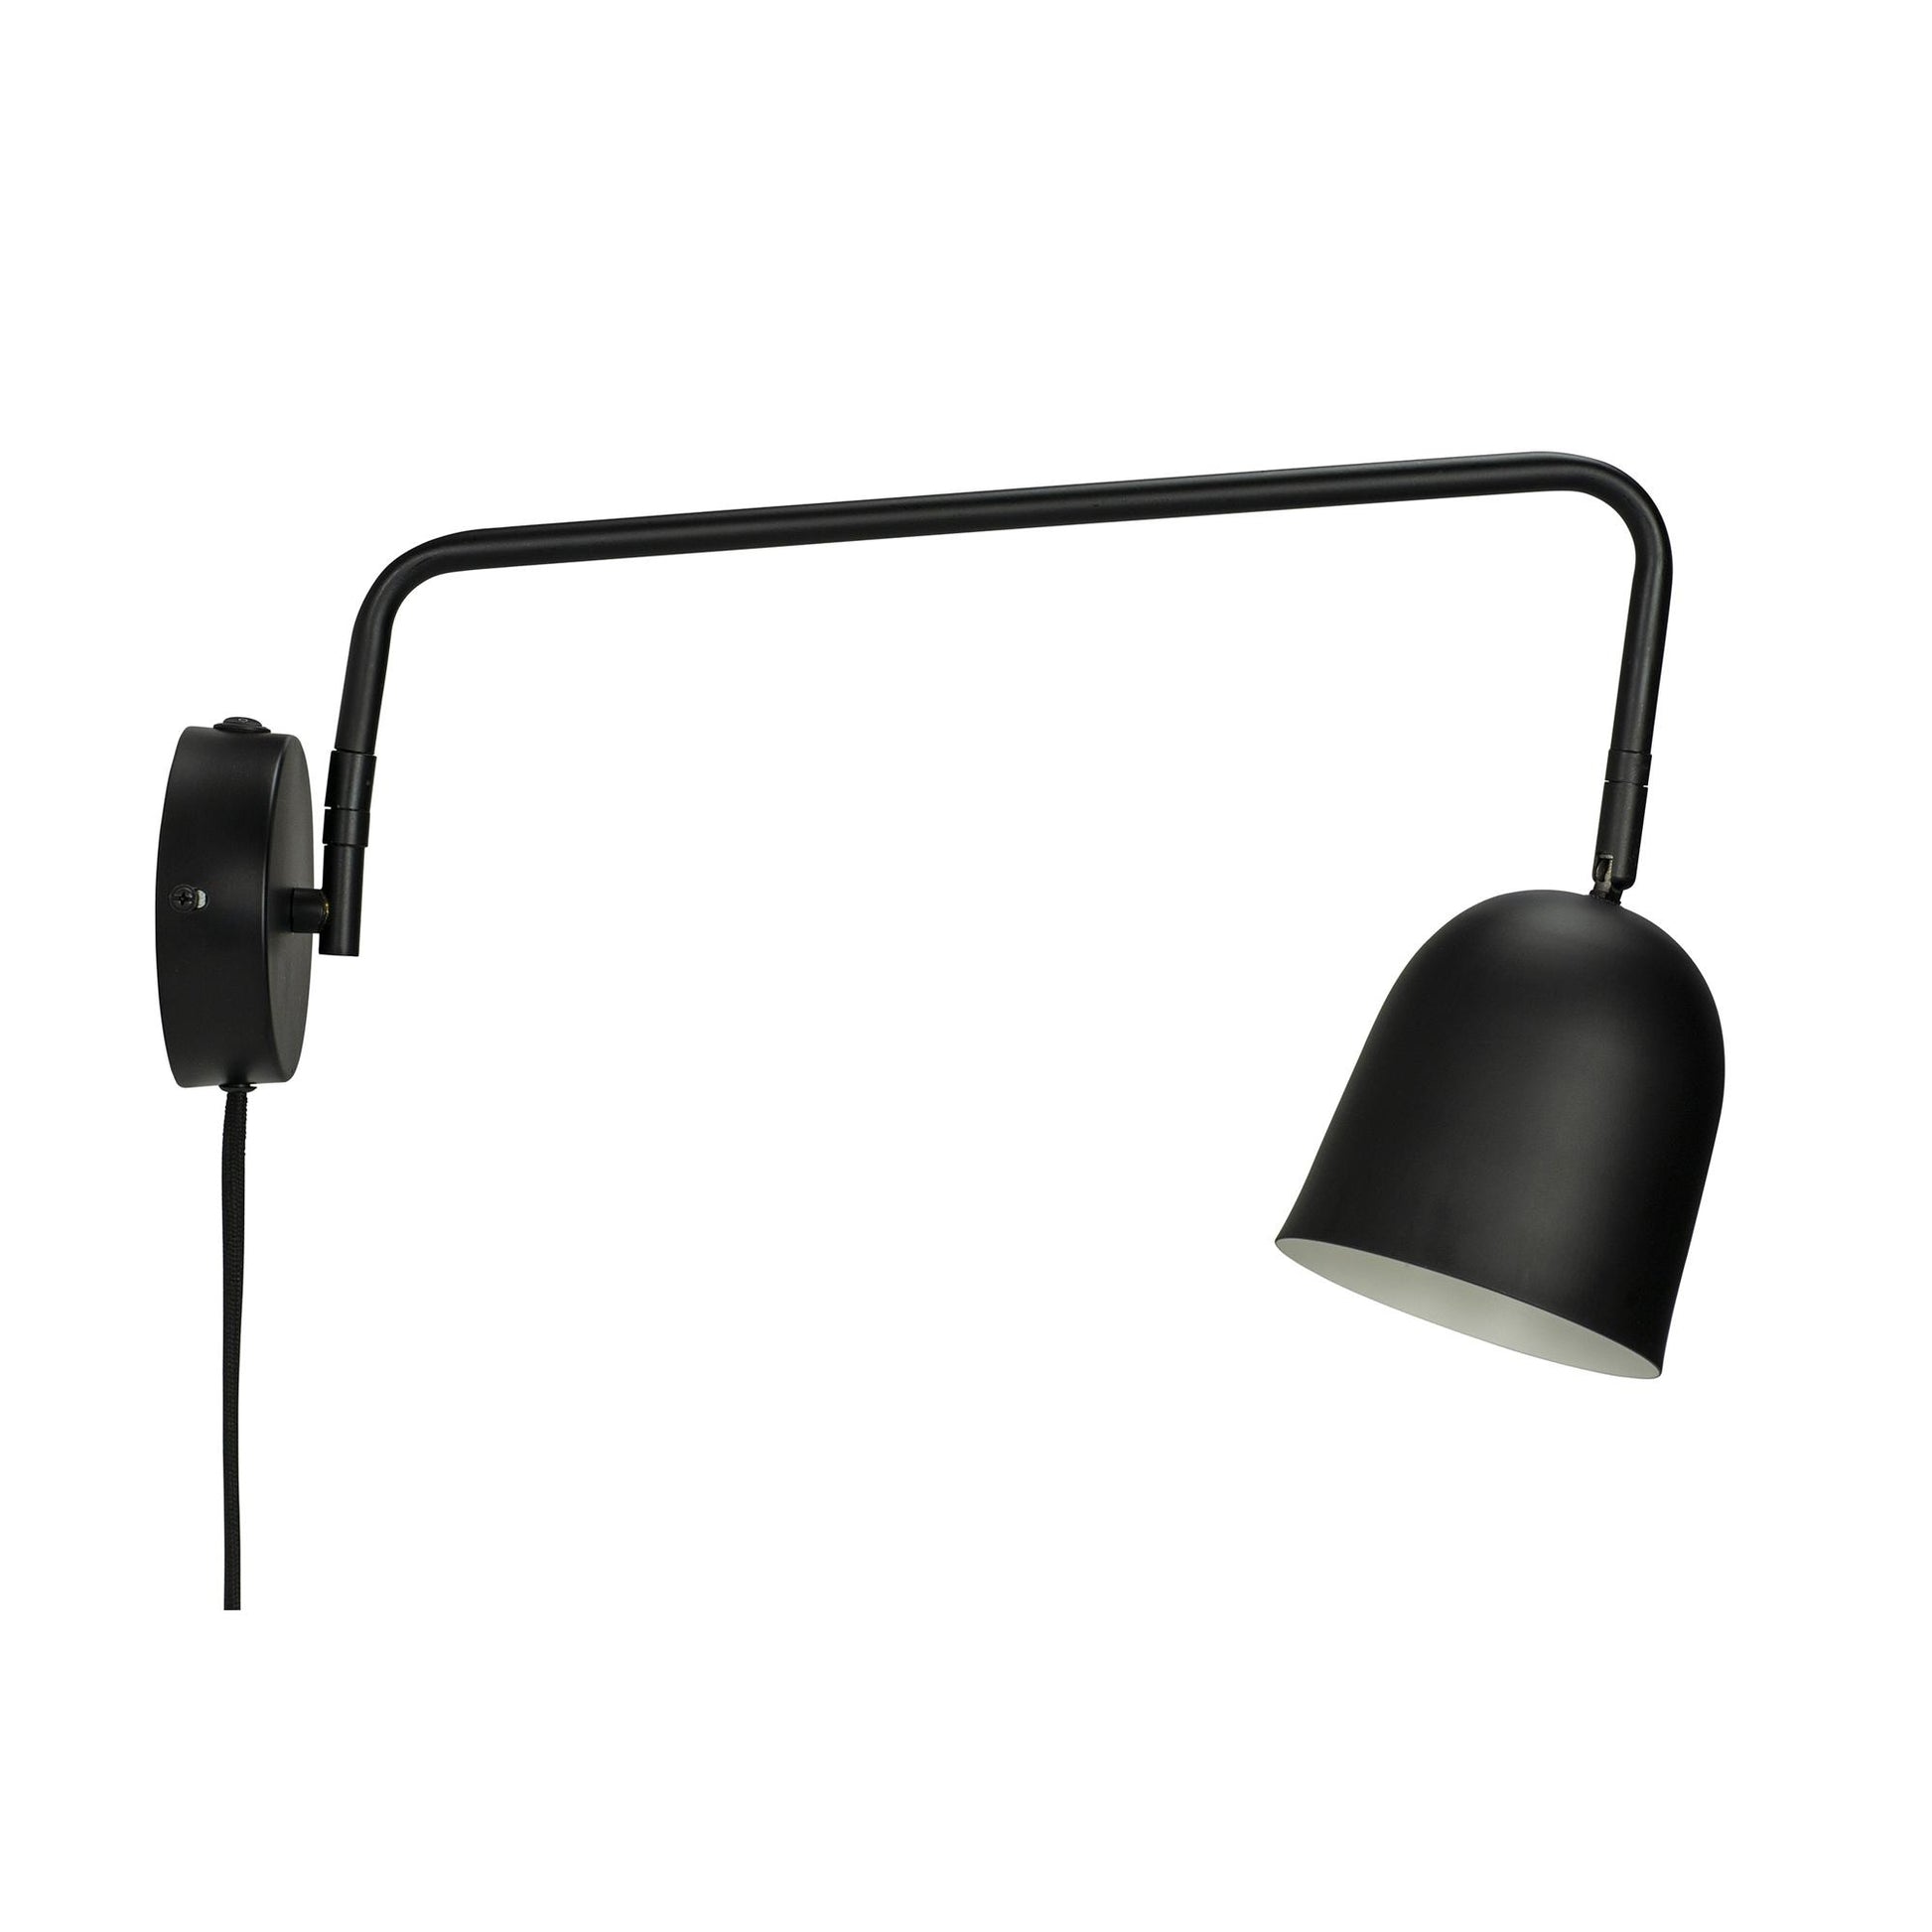 Manchester Wall Lamp by Dyberg Larsen #Black